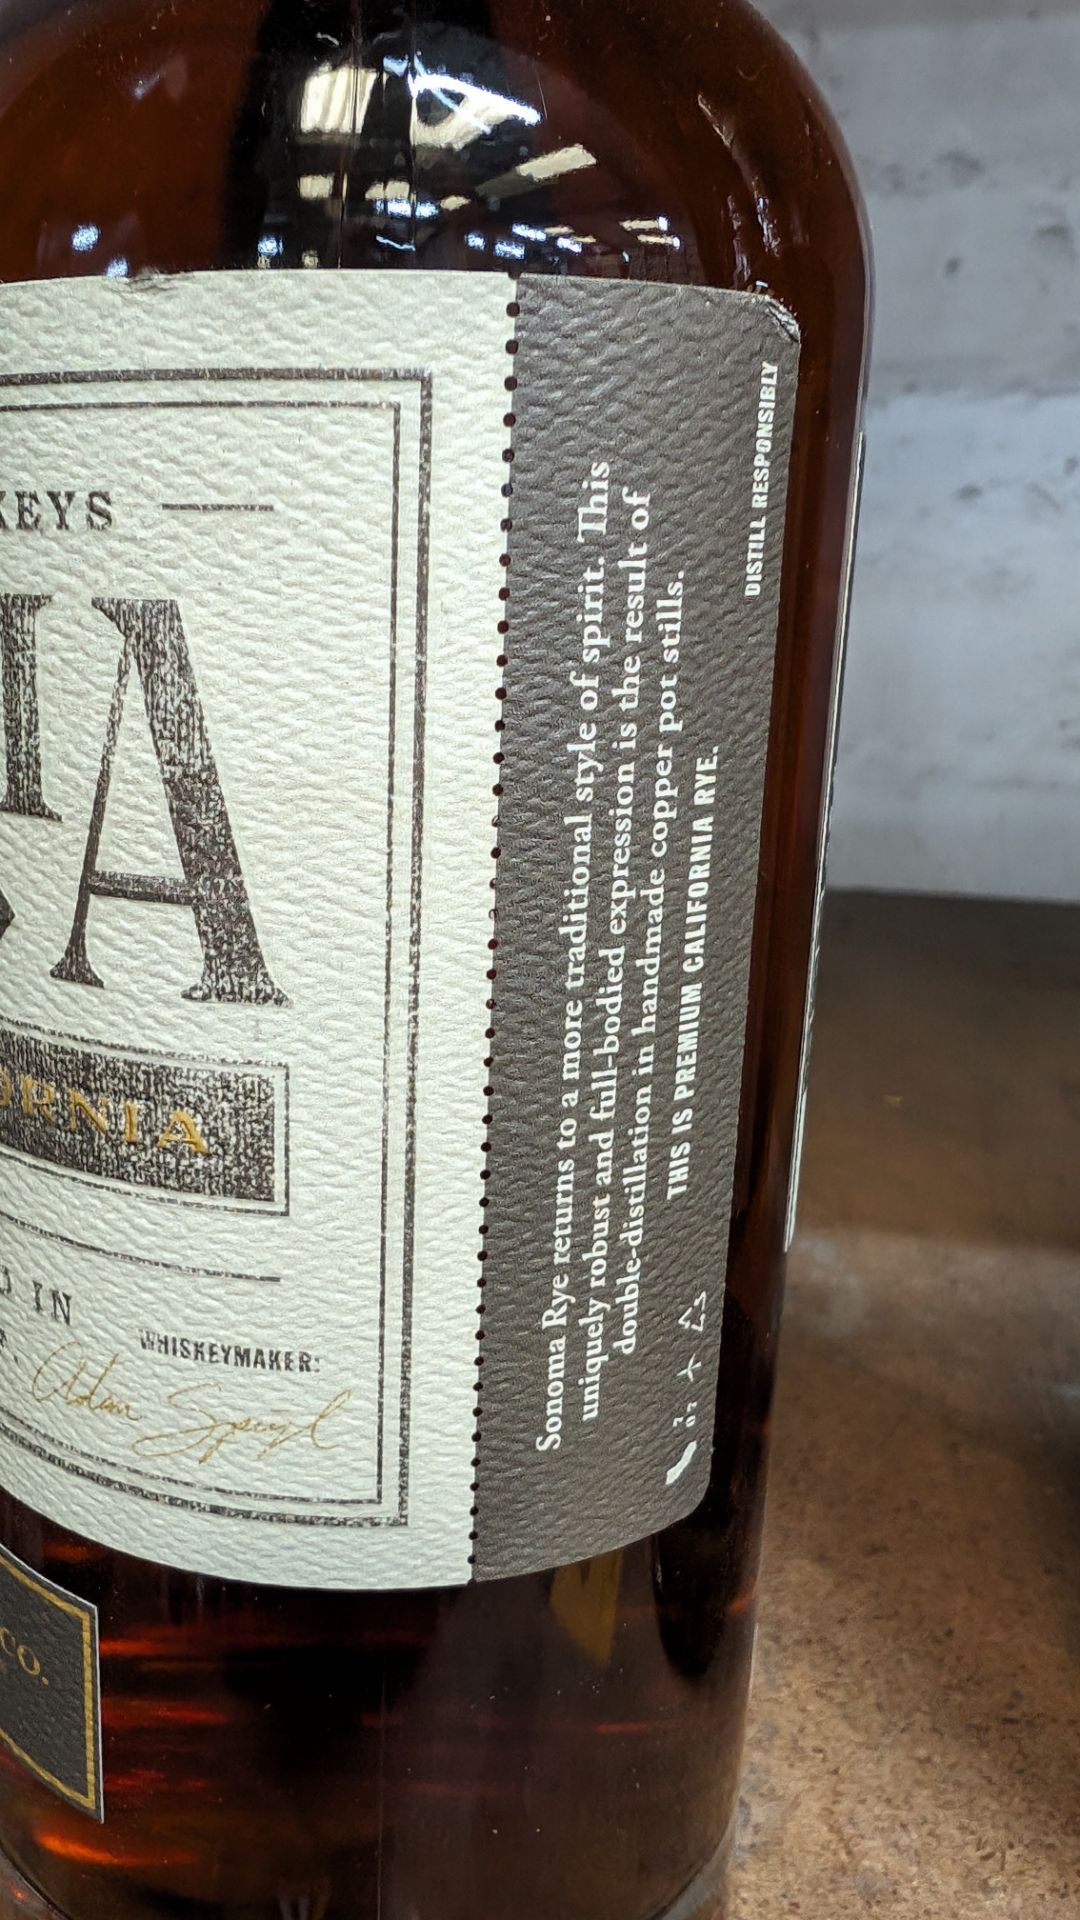 1 off 700ml bottle of Sonoma Rye Whiskey. 46.5% alc/vol (93 proof). Distilled and bottled in Sonom - Image 8 of 8